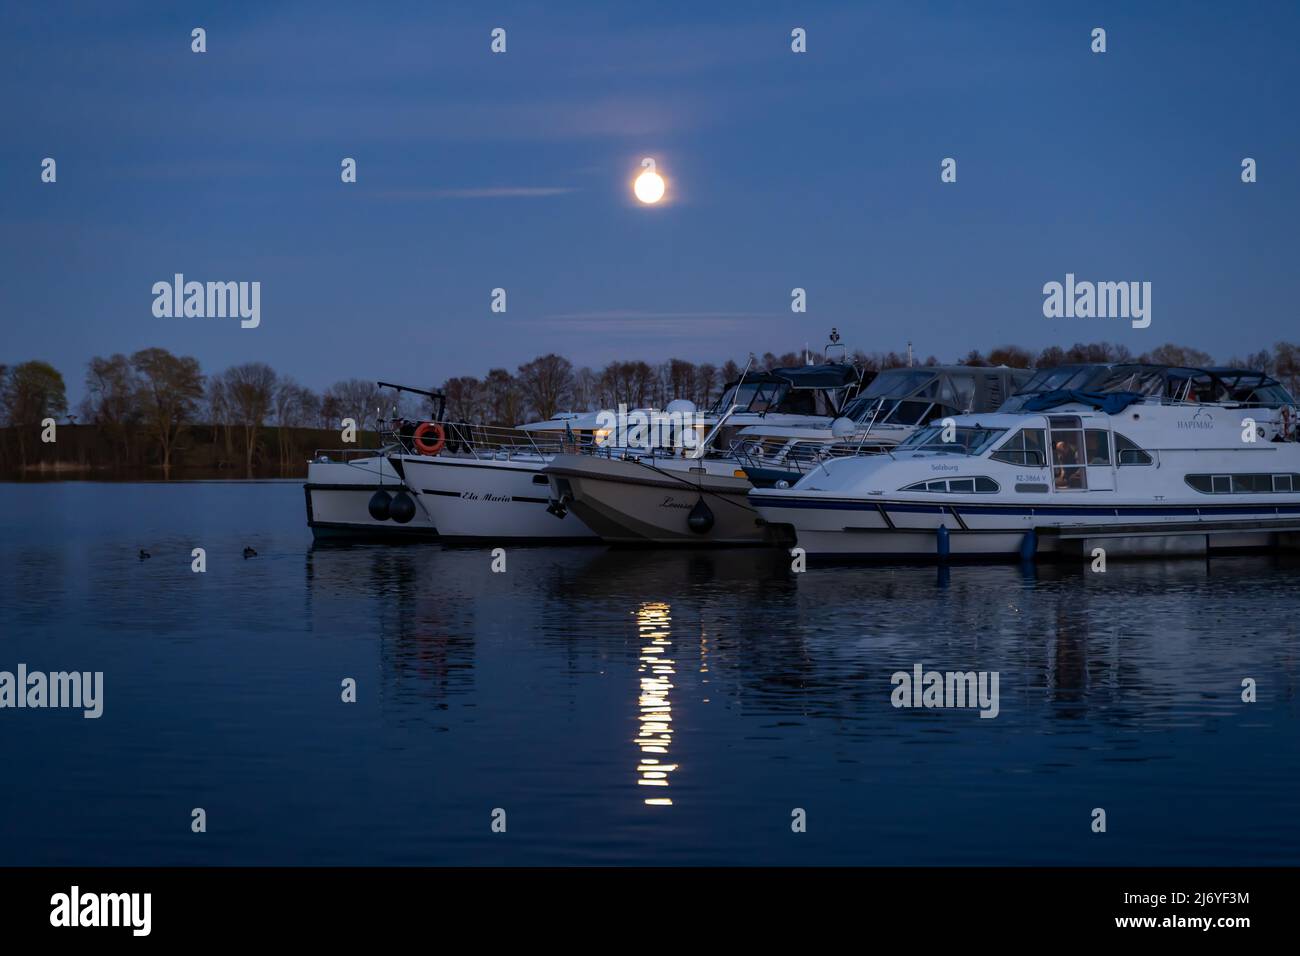 Full moon shining bright on boats and yachts in the harbor. Night at the lake in a rural area. Tranquil scene with beautiful nature. Landscape Stock Photo